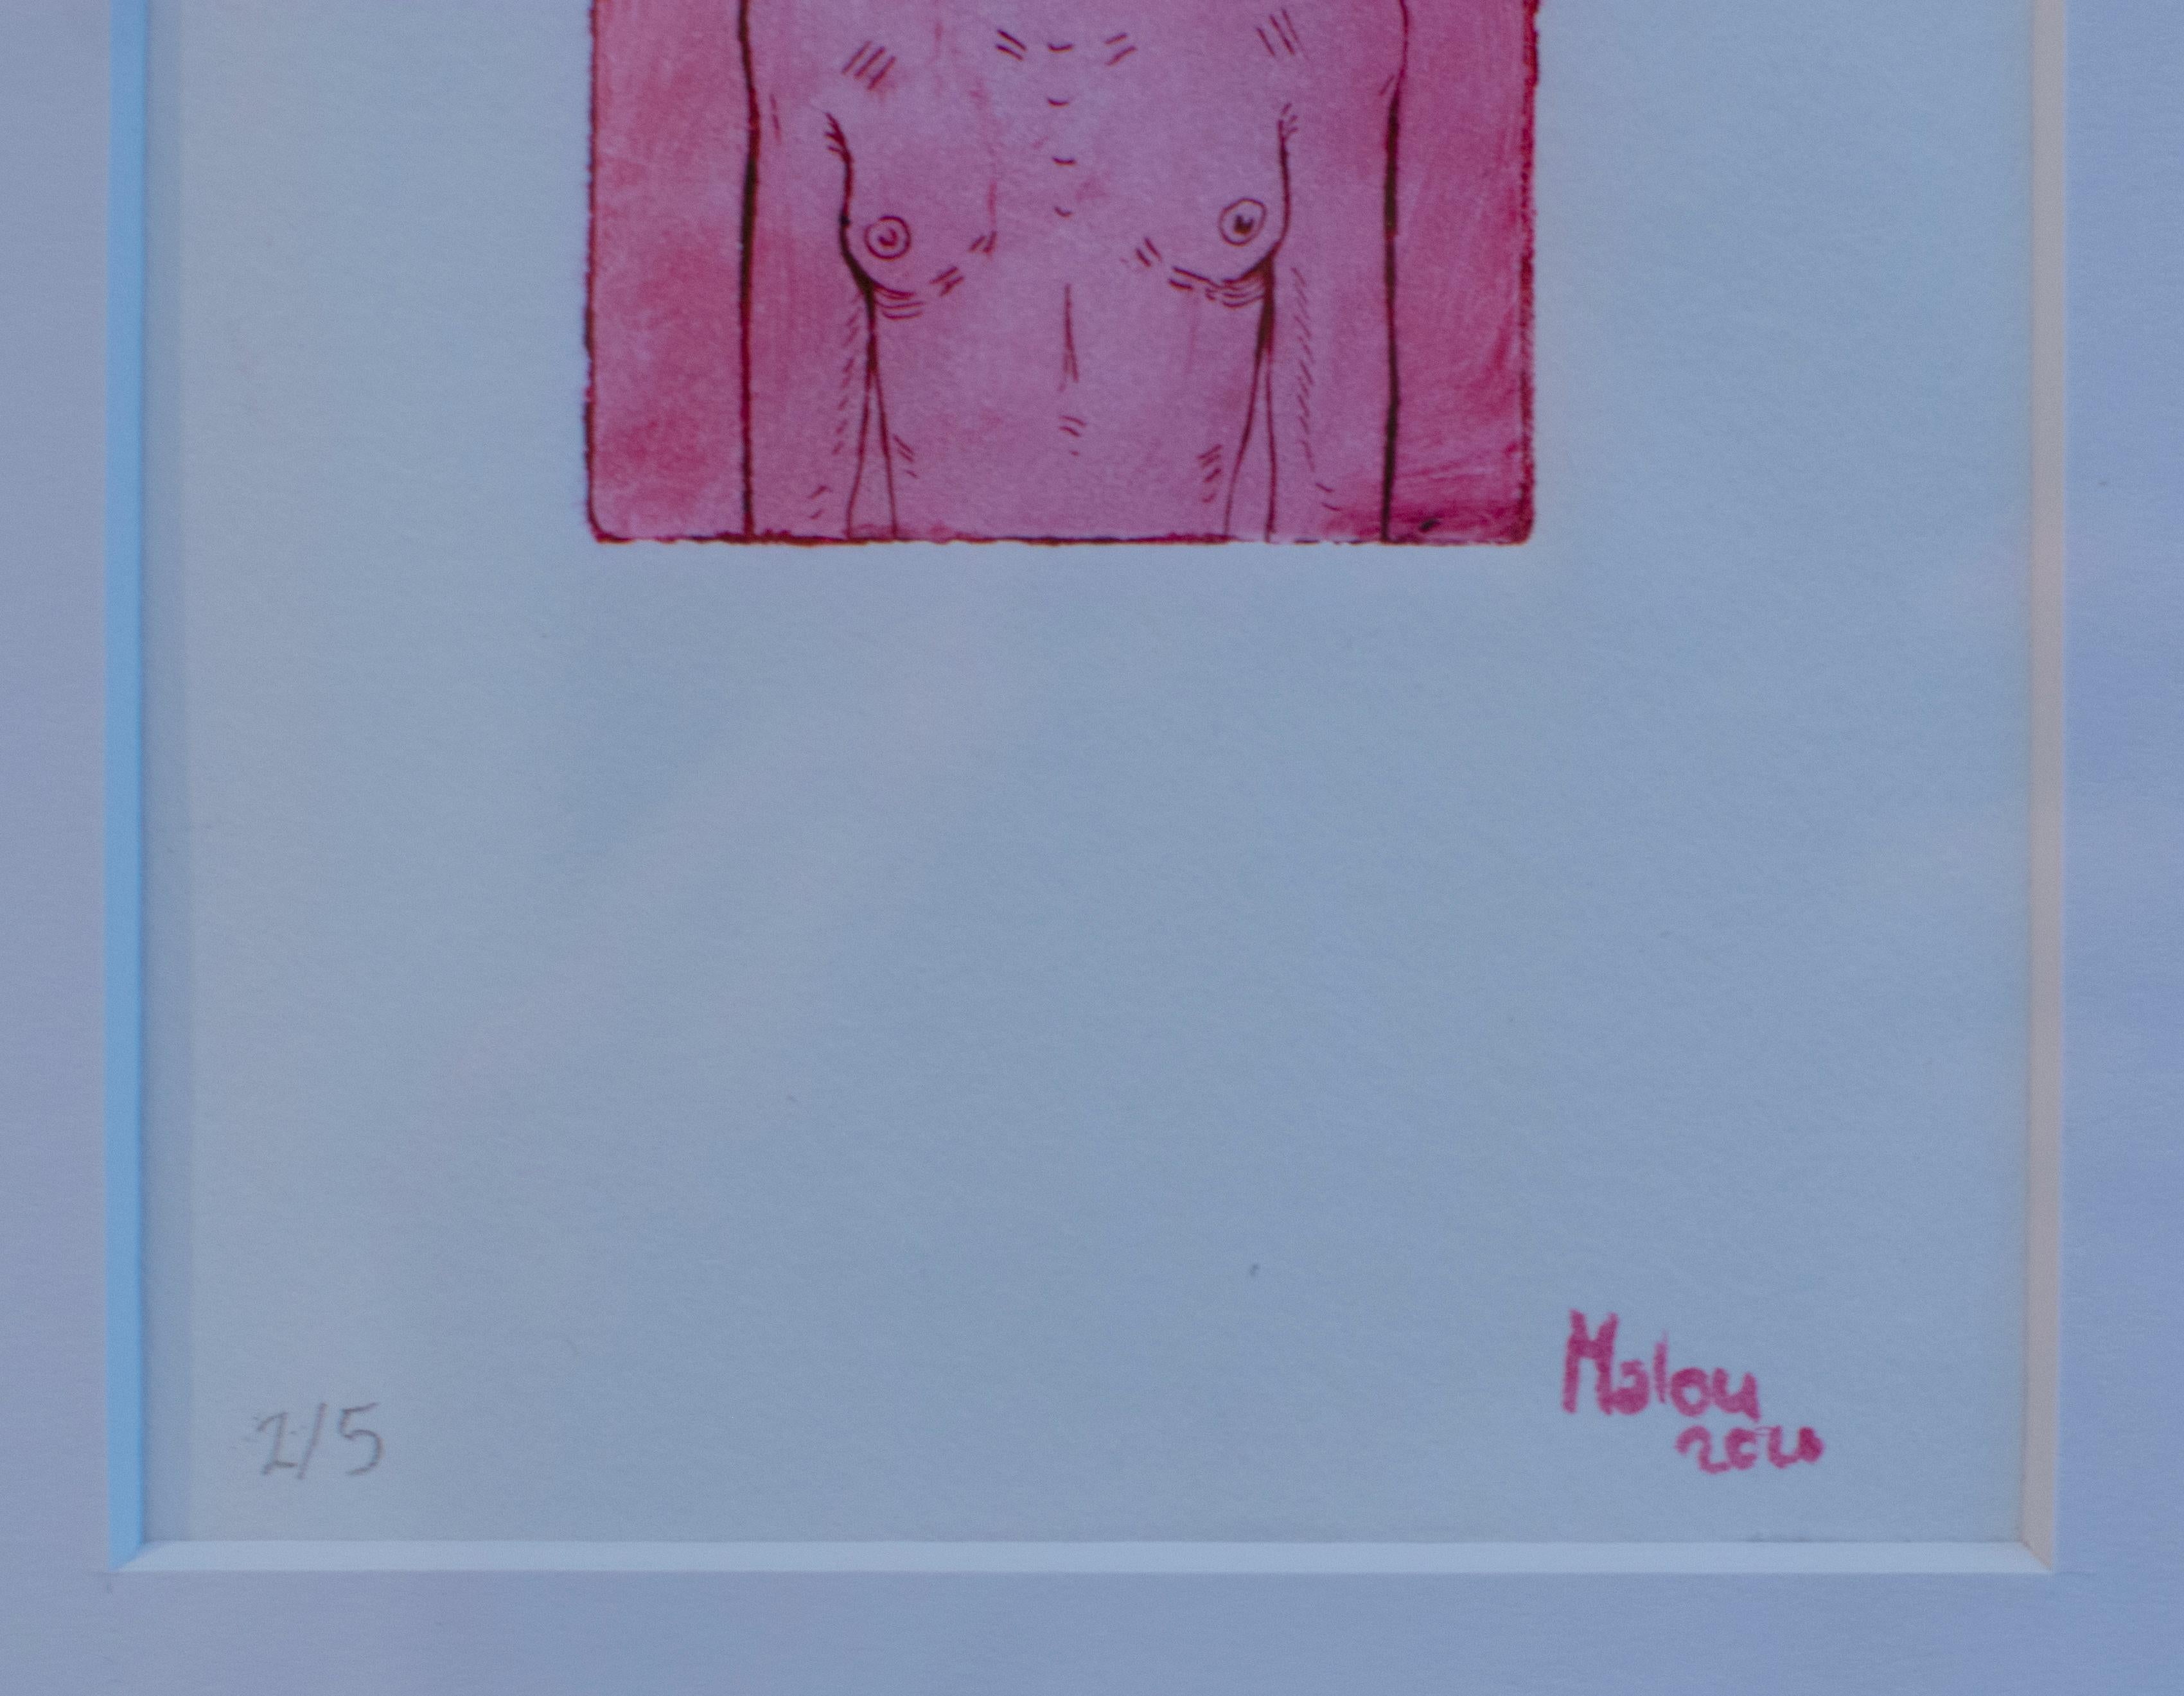 Oberkörper 2 - etching, paper, print, pink, white, young artist, 21st century - Contemporary Print by Malou Großklaus